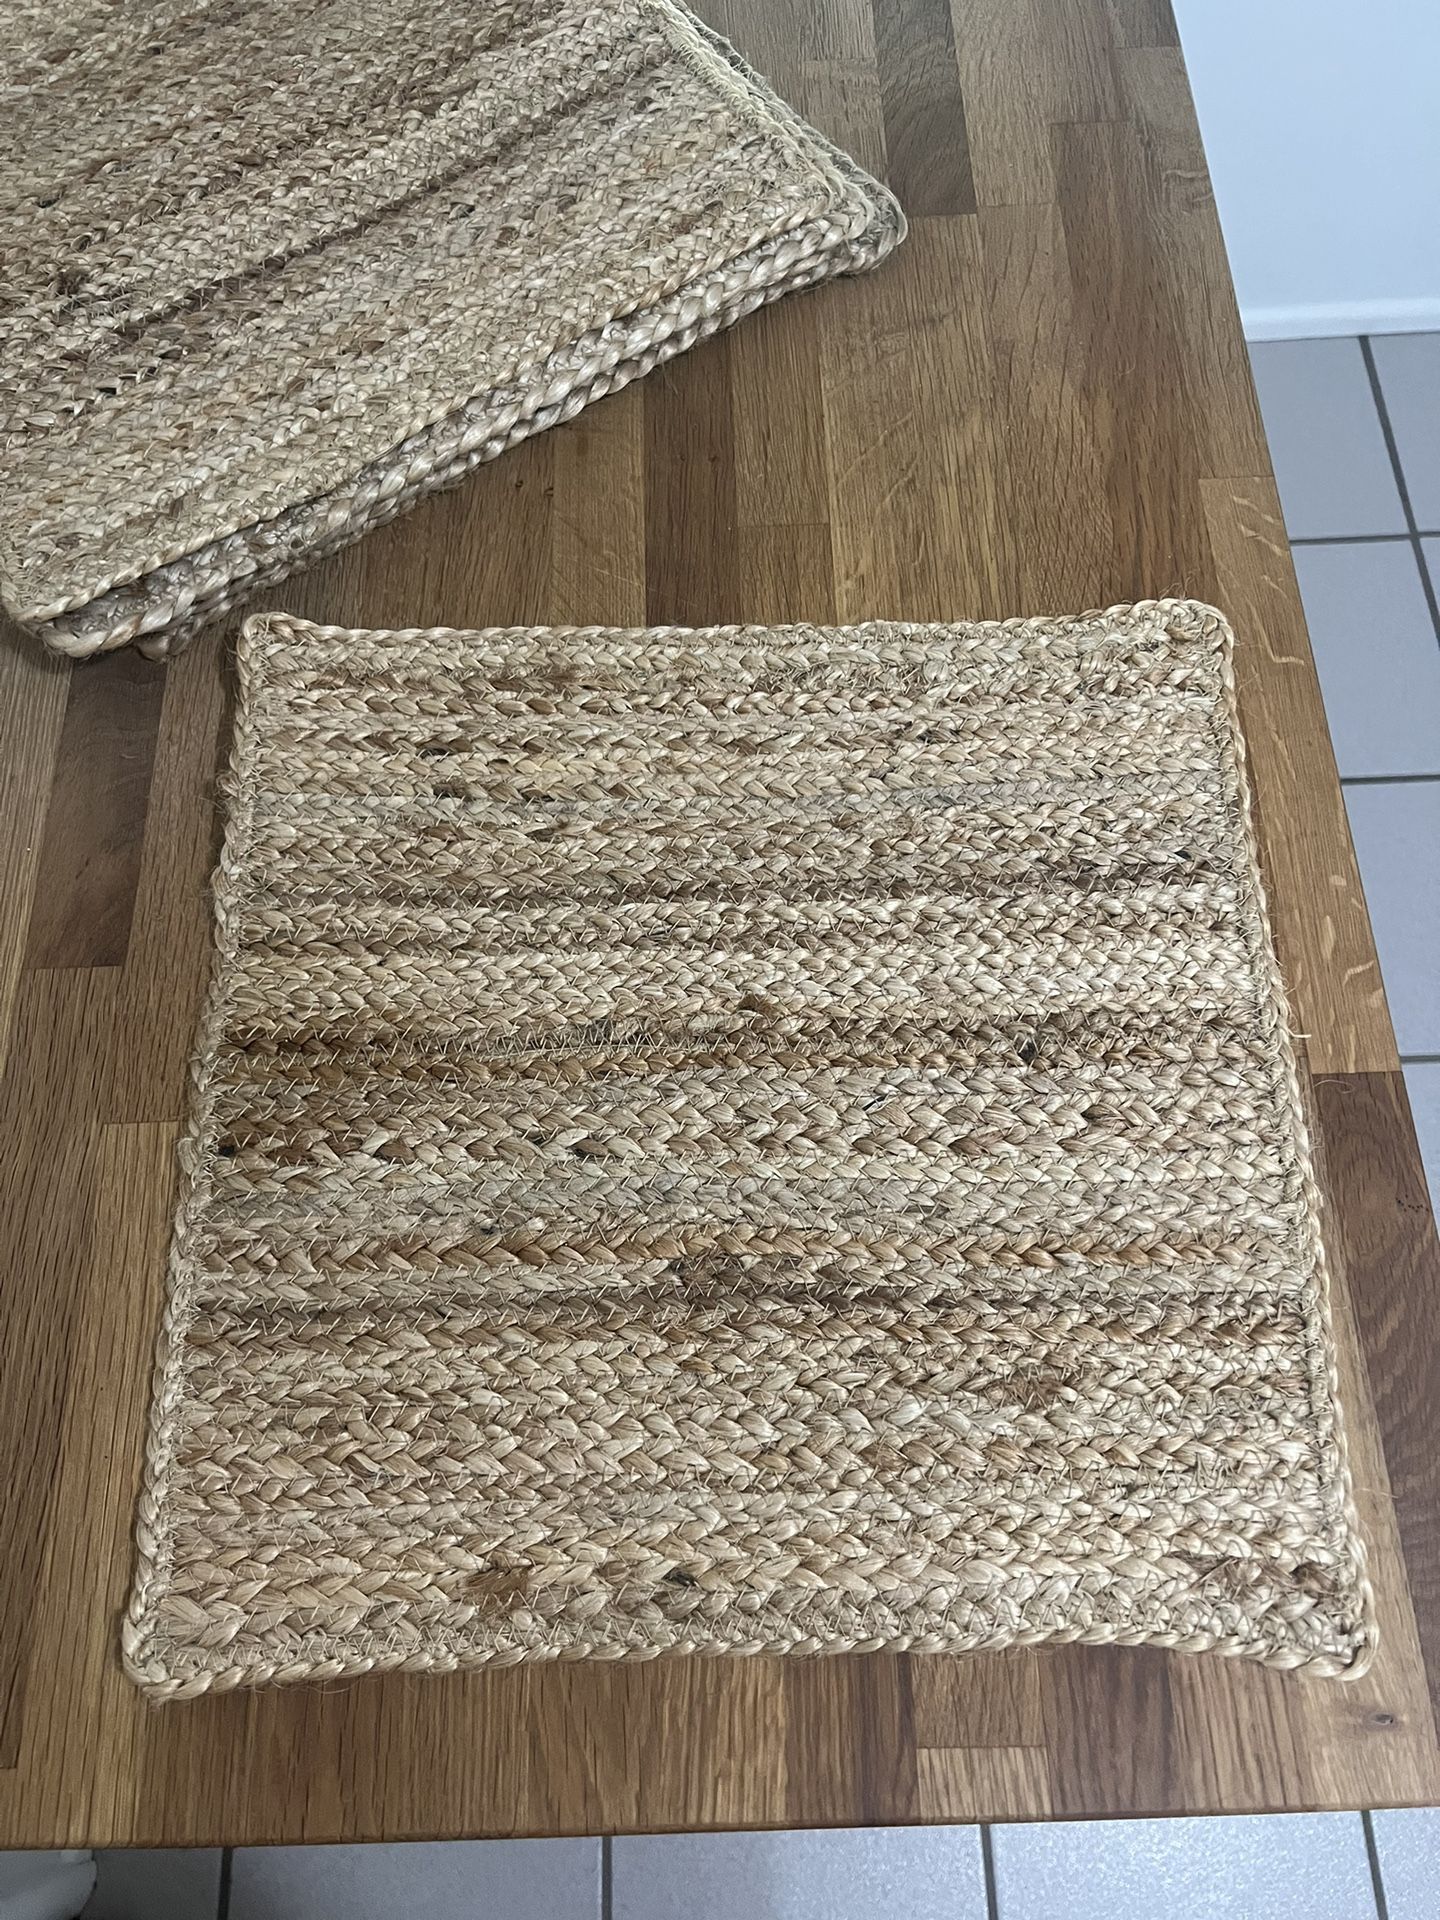 woven placemats 